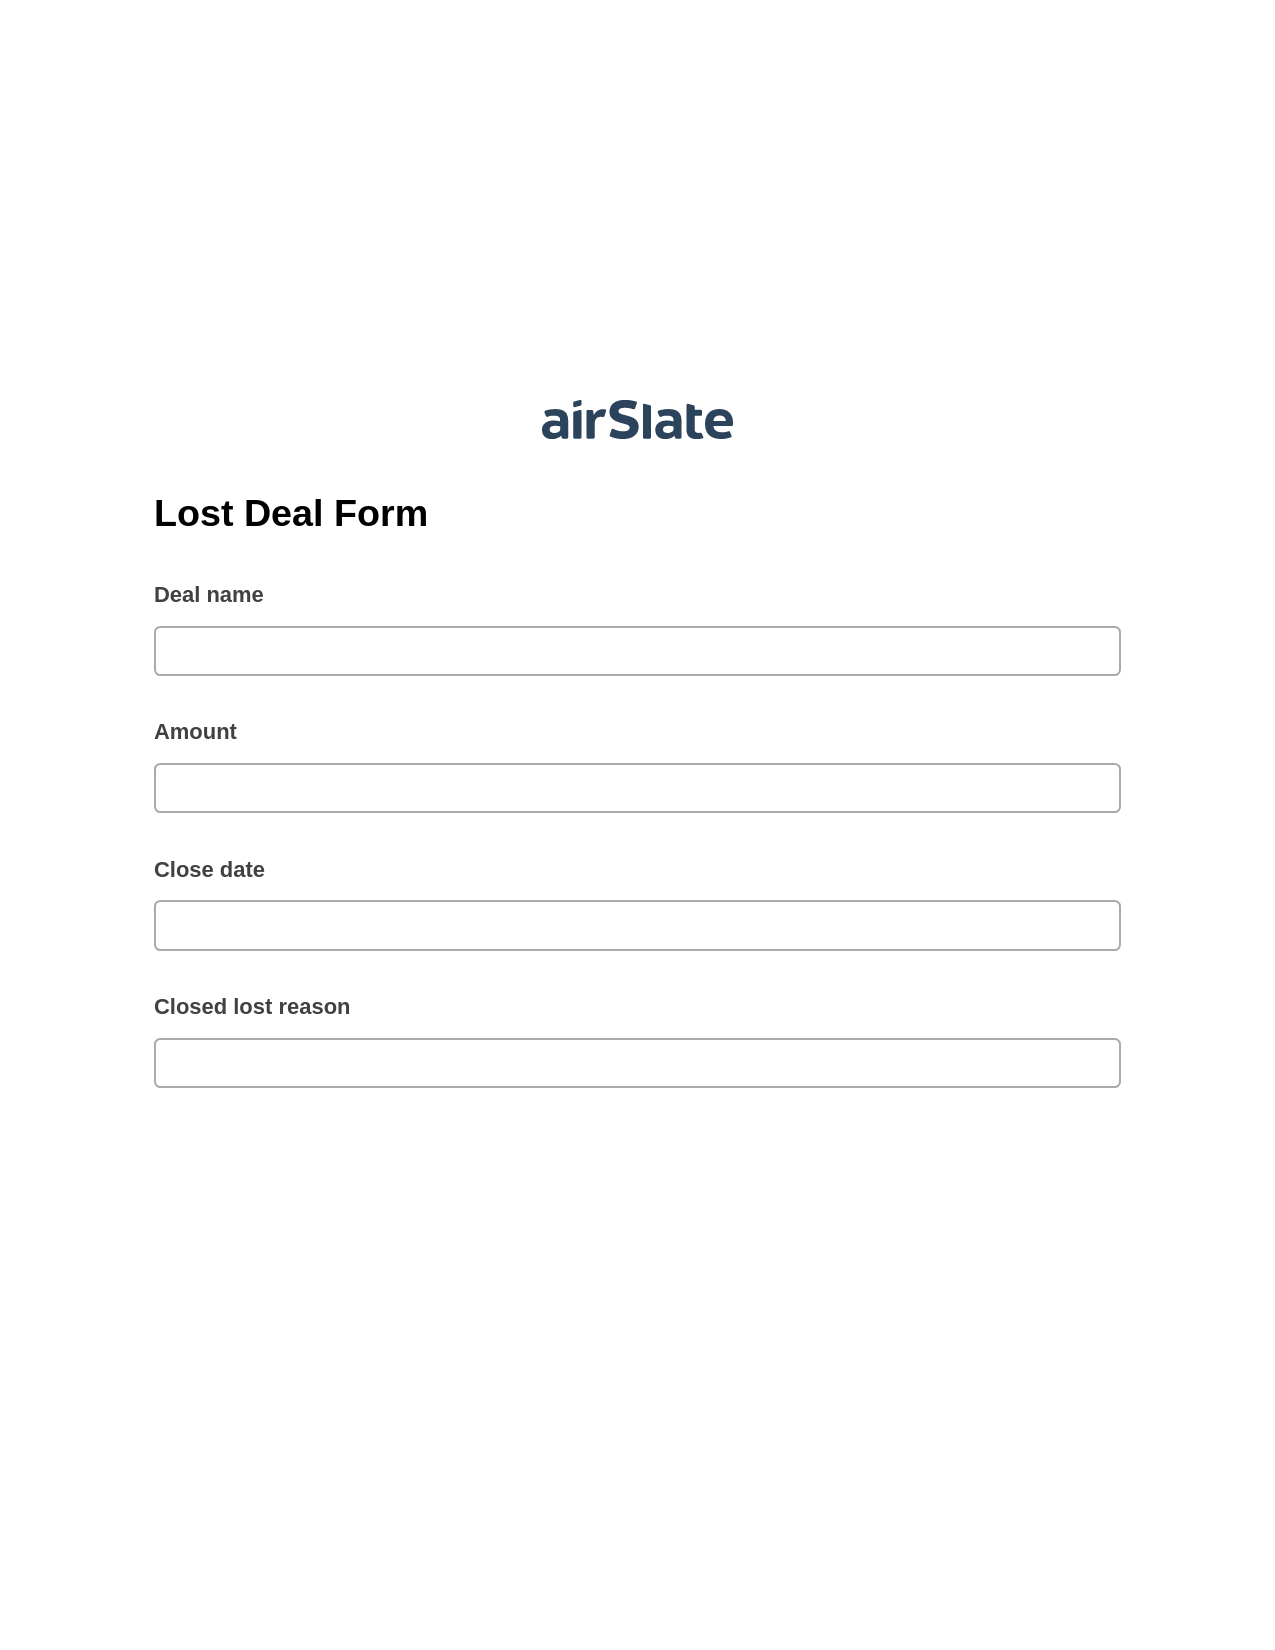 Lost Deal Form Pre-fill from Google Sheets Bot, Send Mailchimp Campaign Bot, Archive to Box Bot